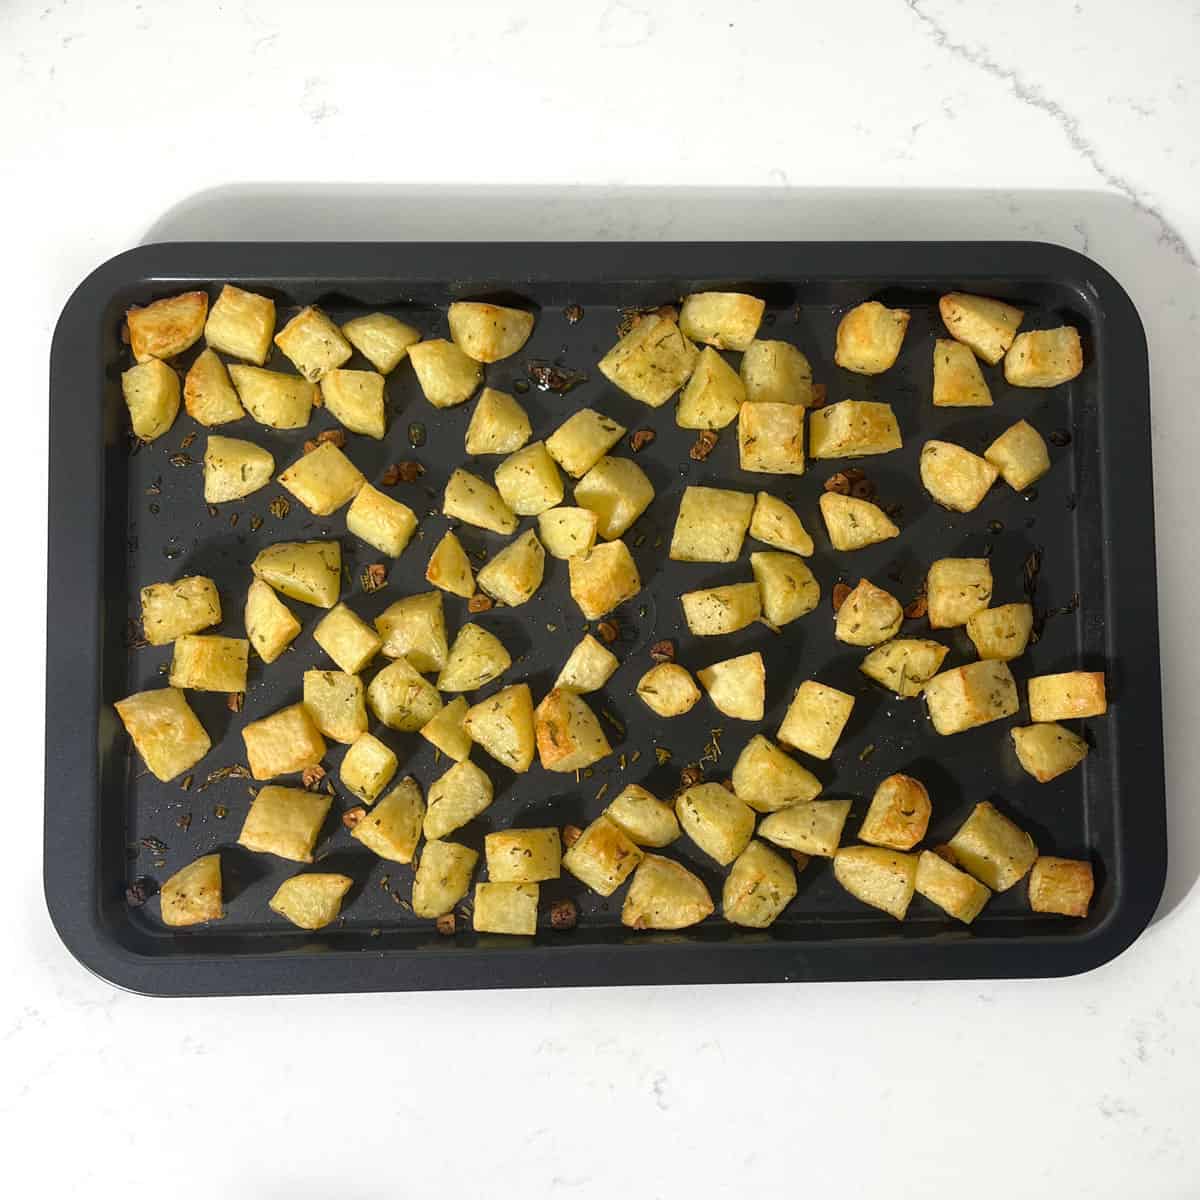 Roasted parmentier potatoes on a baking tray.